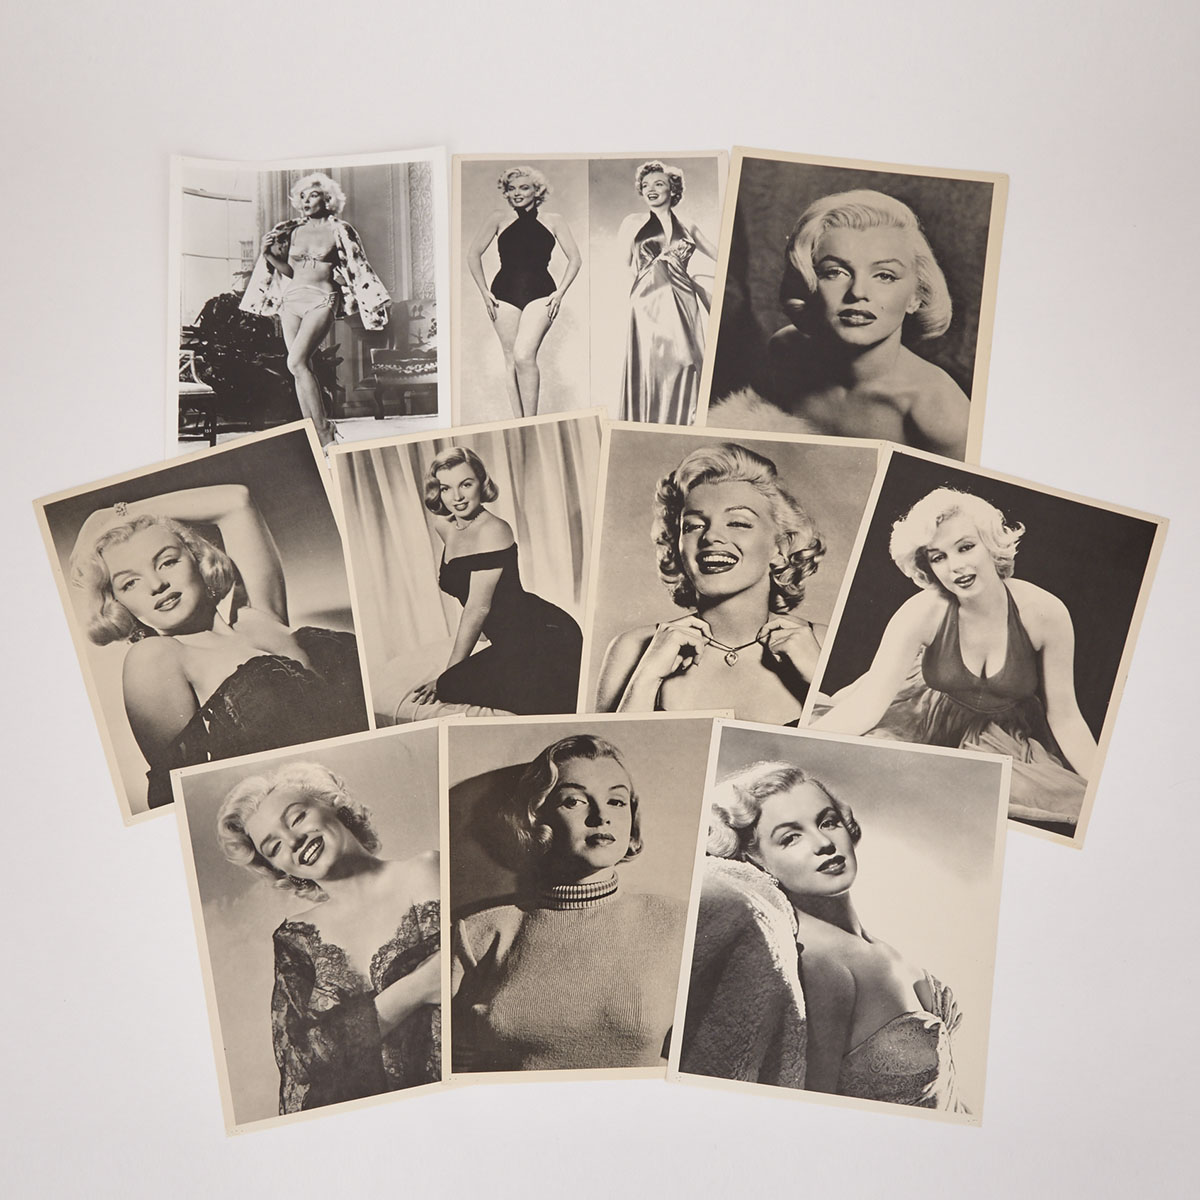 Collection of Ten Publicity Photographs of Marilyn Monroe, mid 20th century